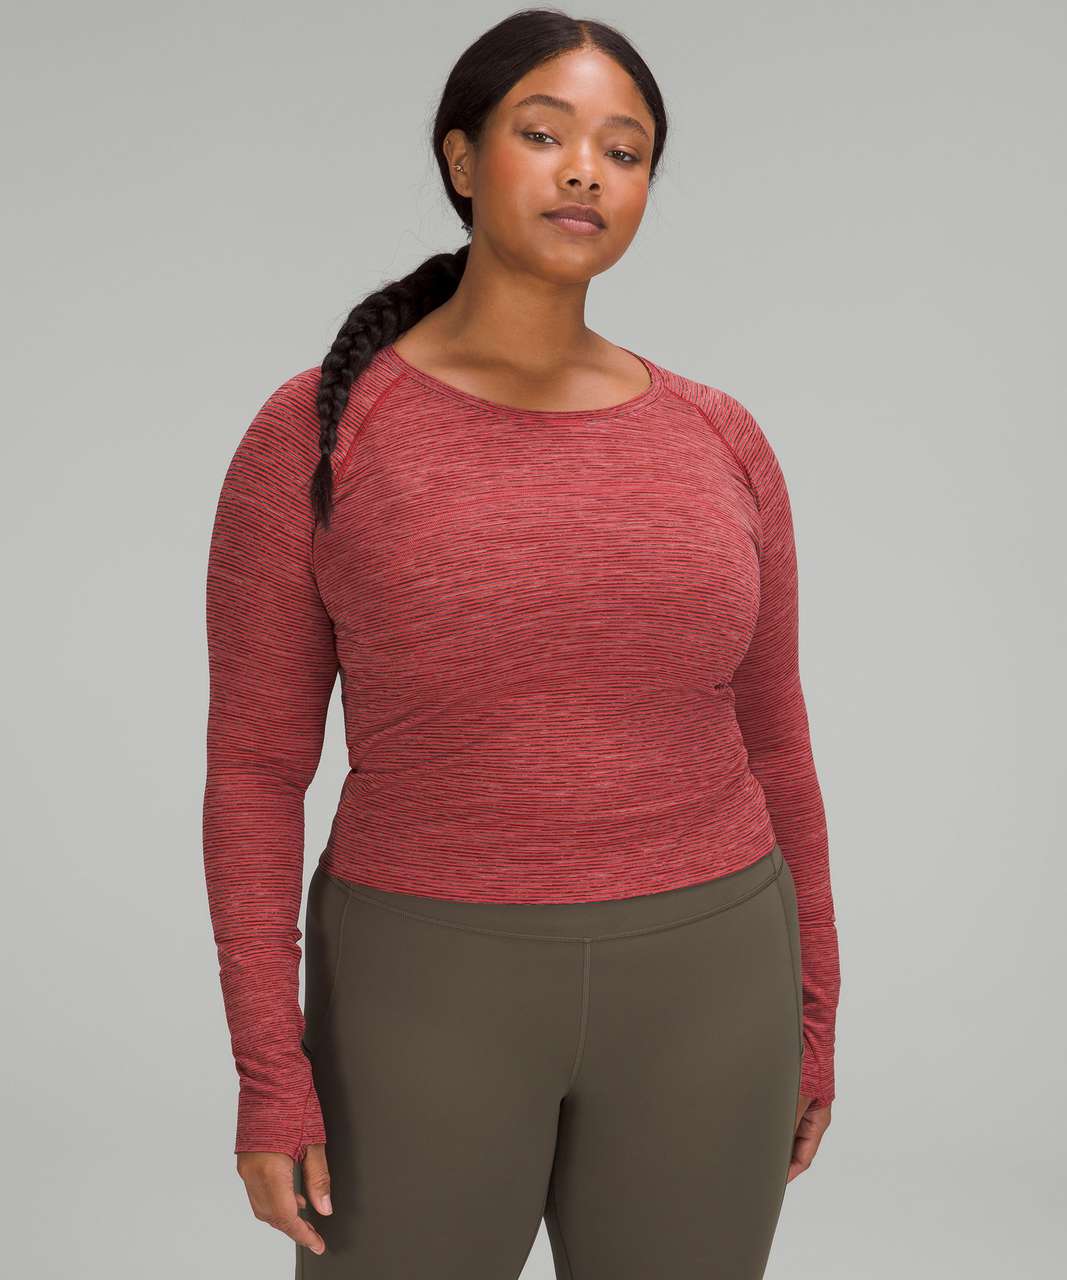 Lululemon Swiftly Tech Long Sleeve Shirt 2.0 *Race Length - Wee Are From Space Carnation Red